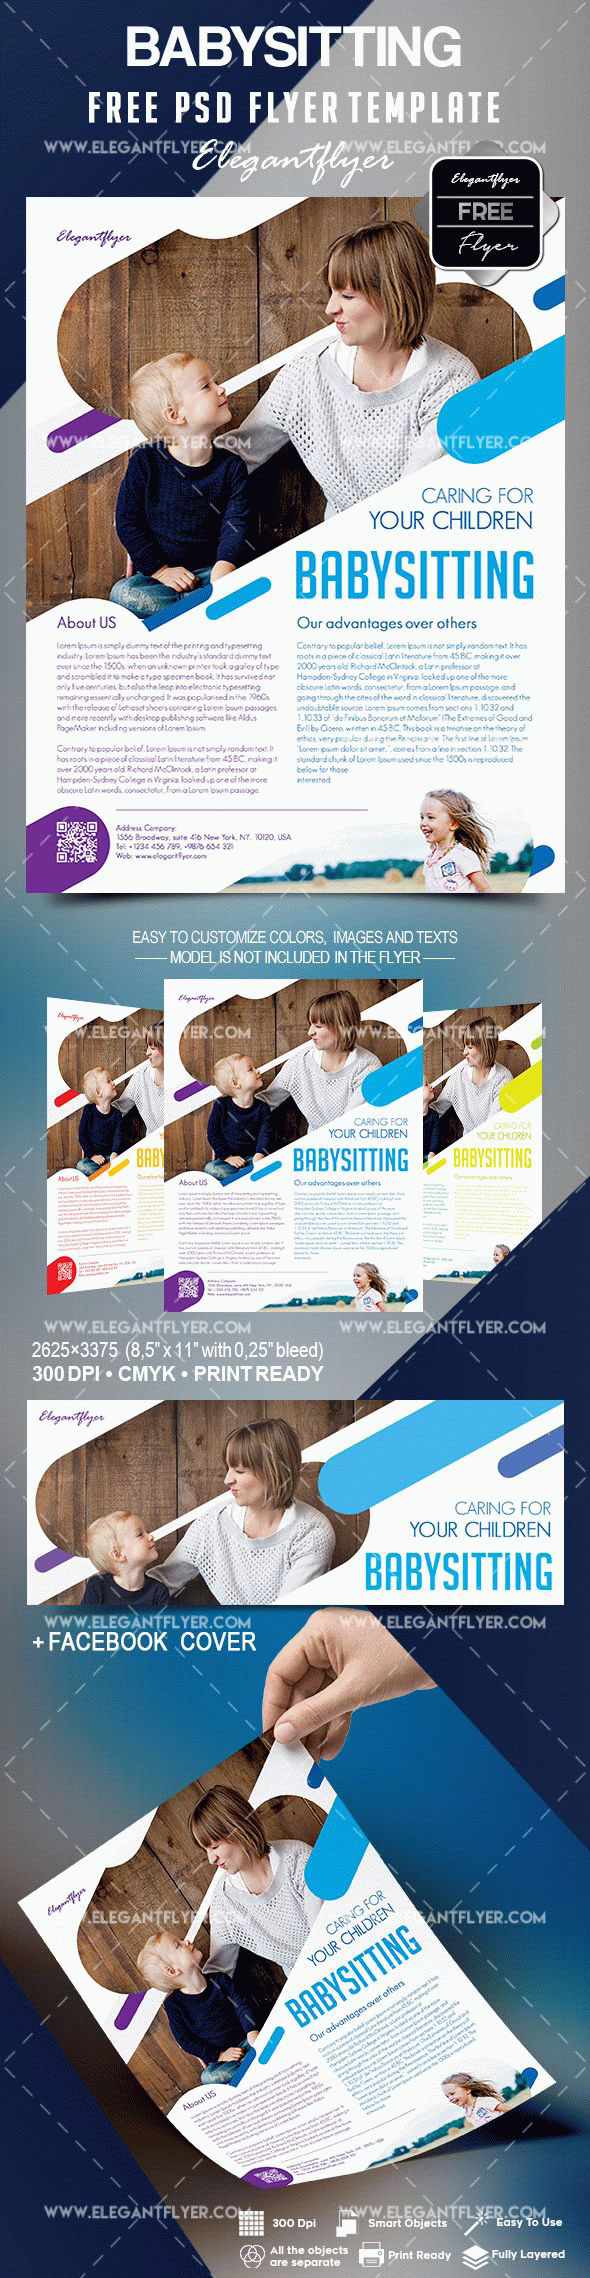 Babysitting Flyer Template Free on Behance Within Babysitter Flyer Template